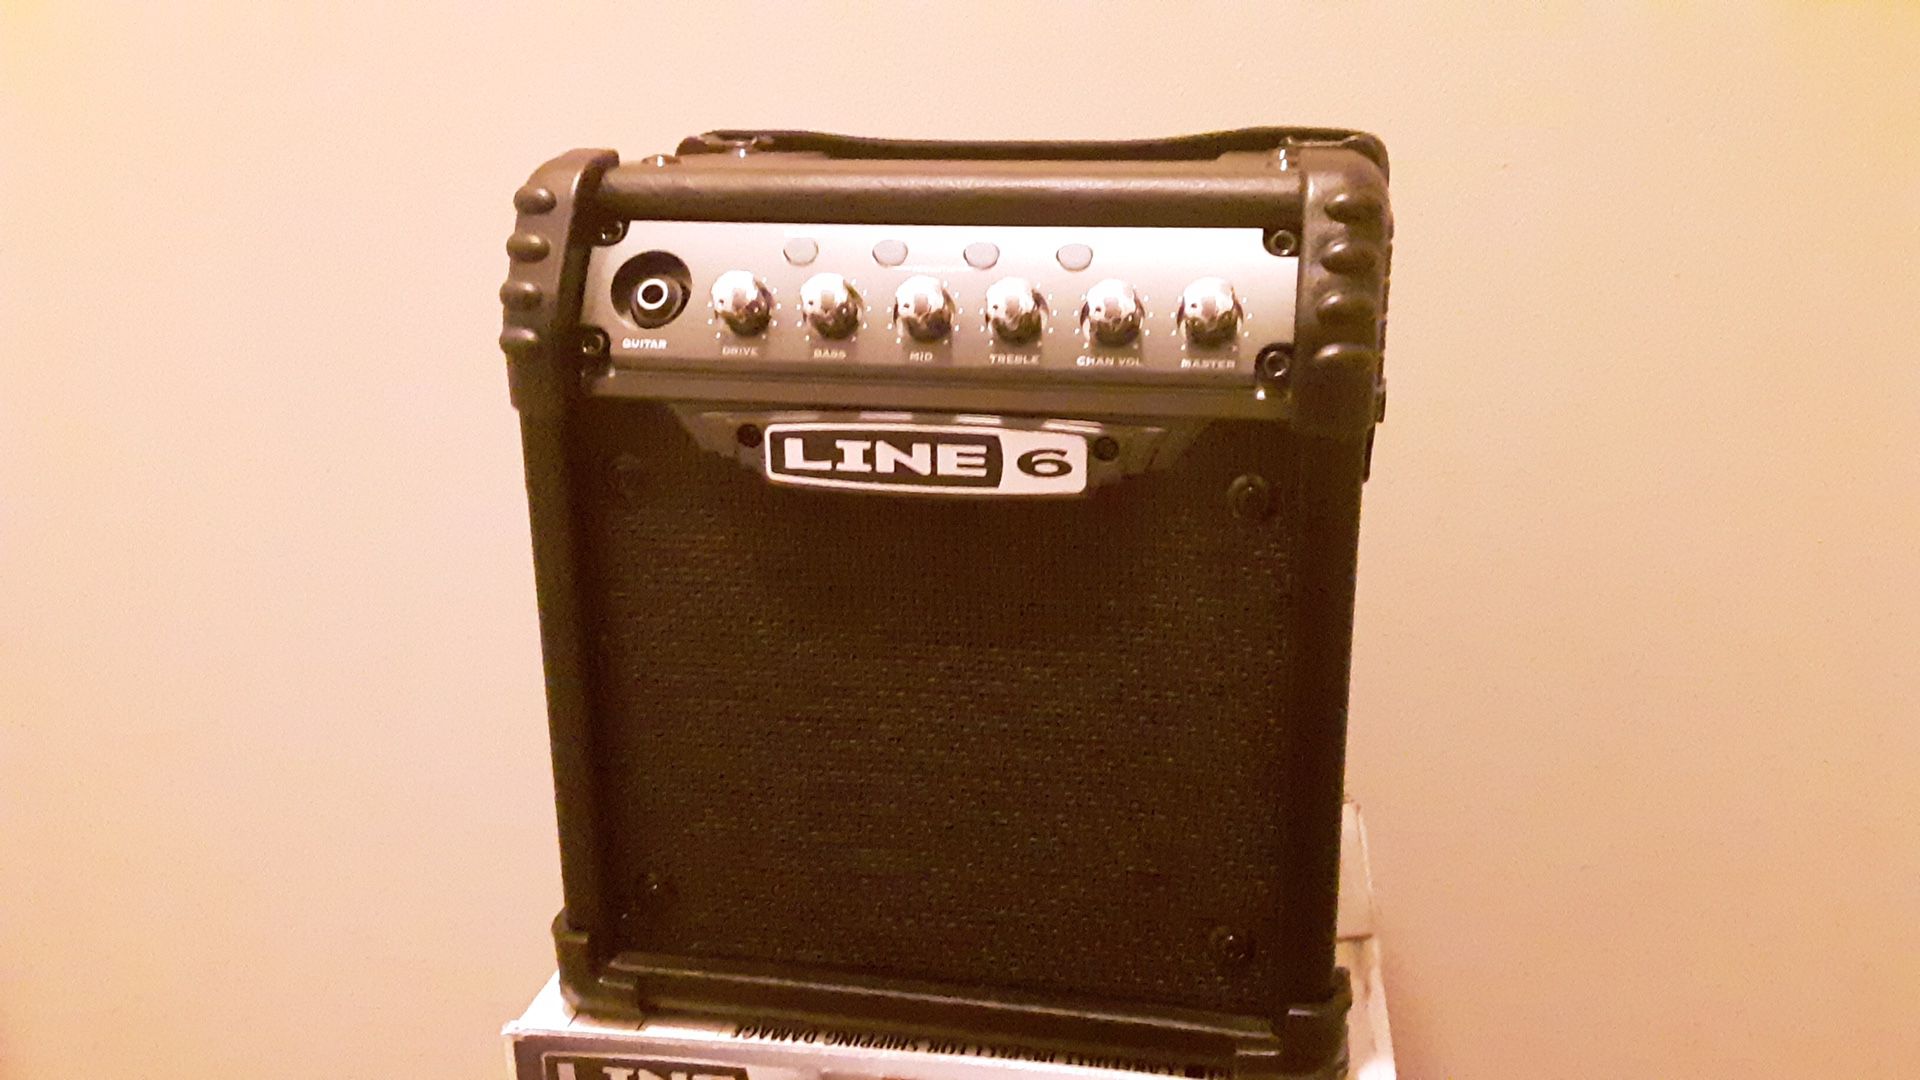 Line 6 Micro Spider Amp (Battery Powered Amp)